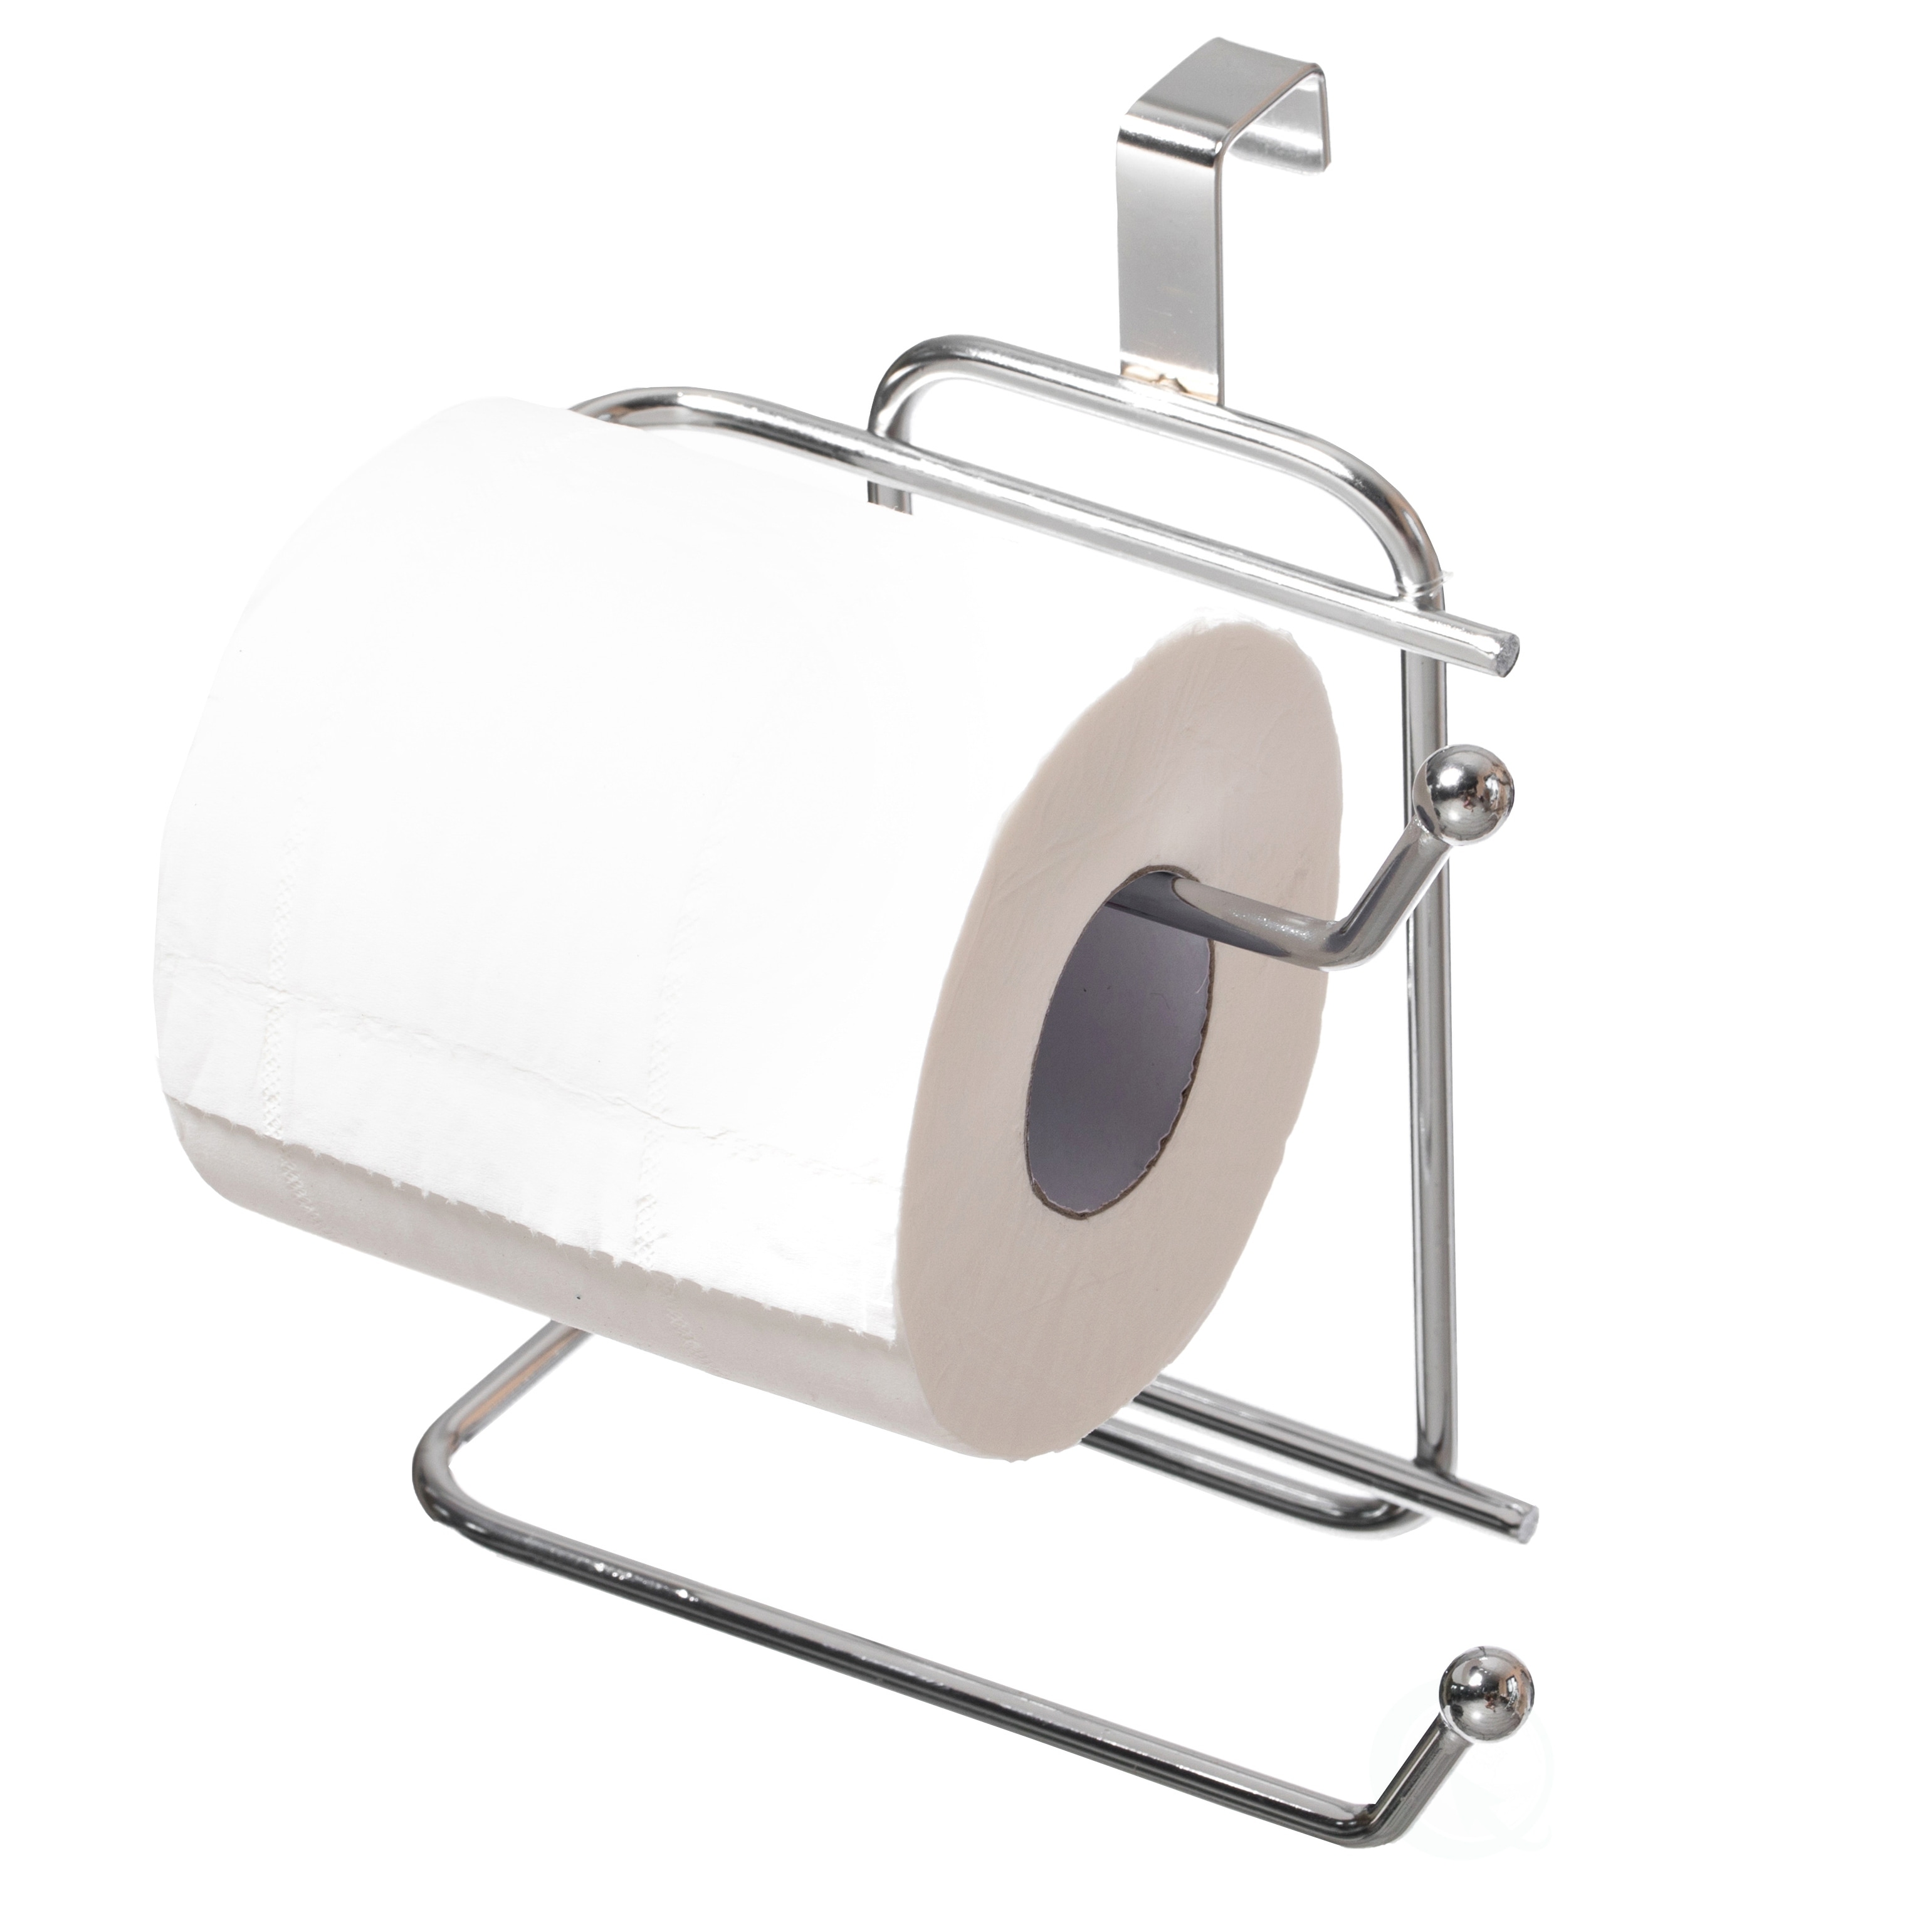 https://ak1.ostkcdn.com/images/products/is/images/direct/3224328ea5e989de8988b3a8a2b6d21d7229a233/Toilet-Paper-Holder-r%2C-Over-The-Tank-Two-Slot-Tissue-Organizer.jpg